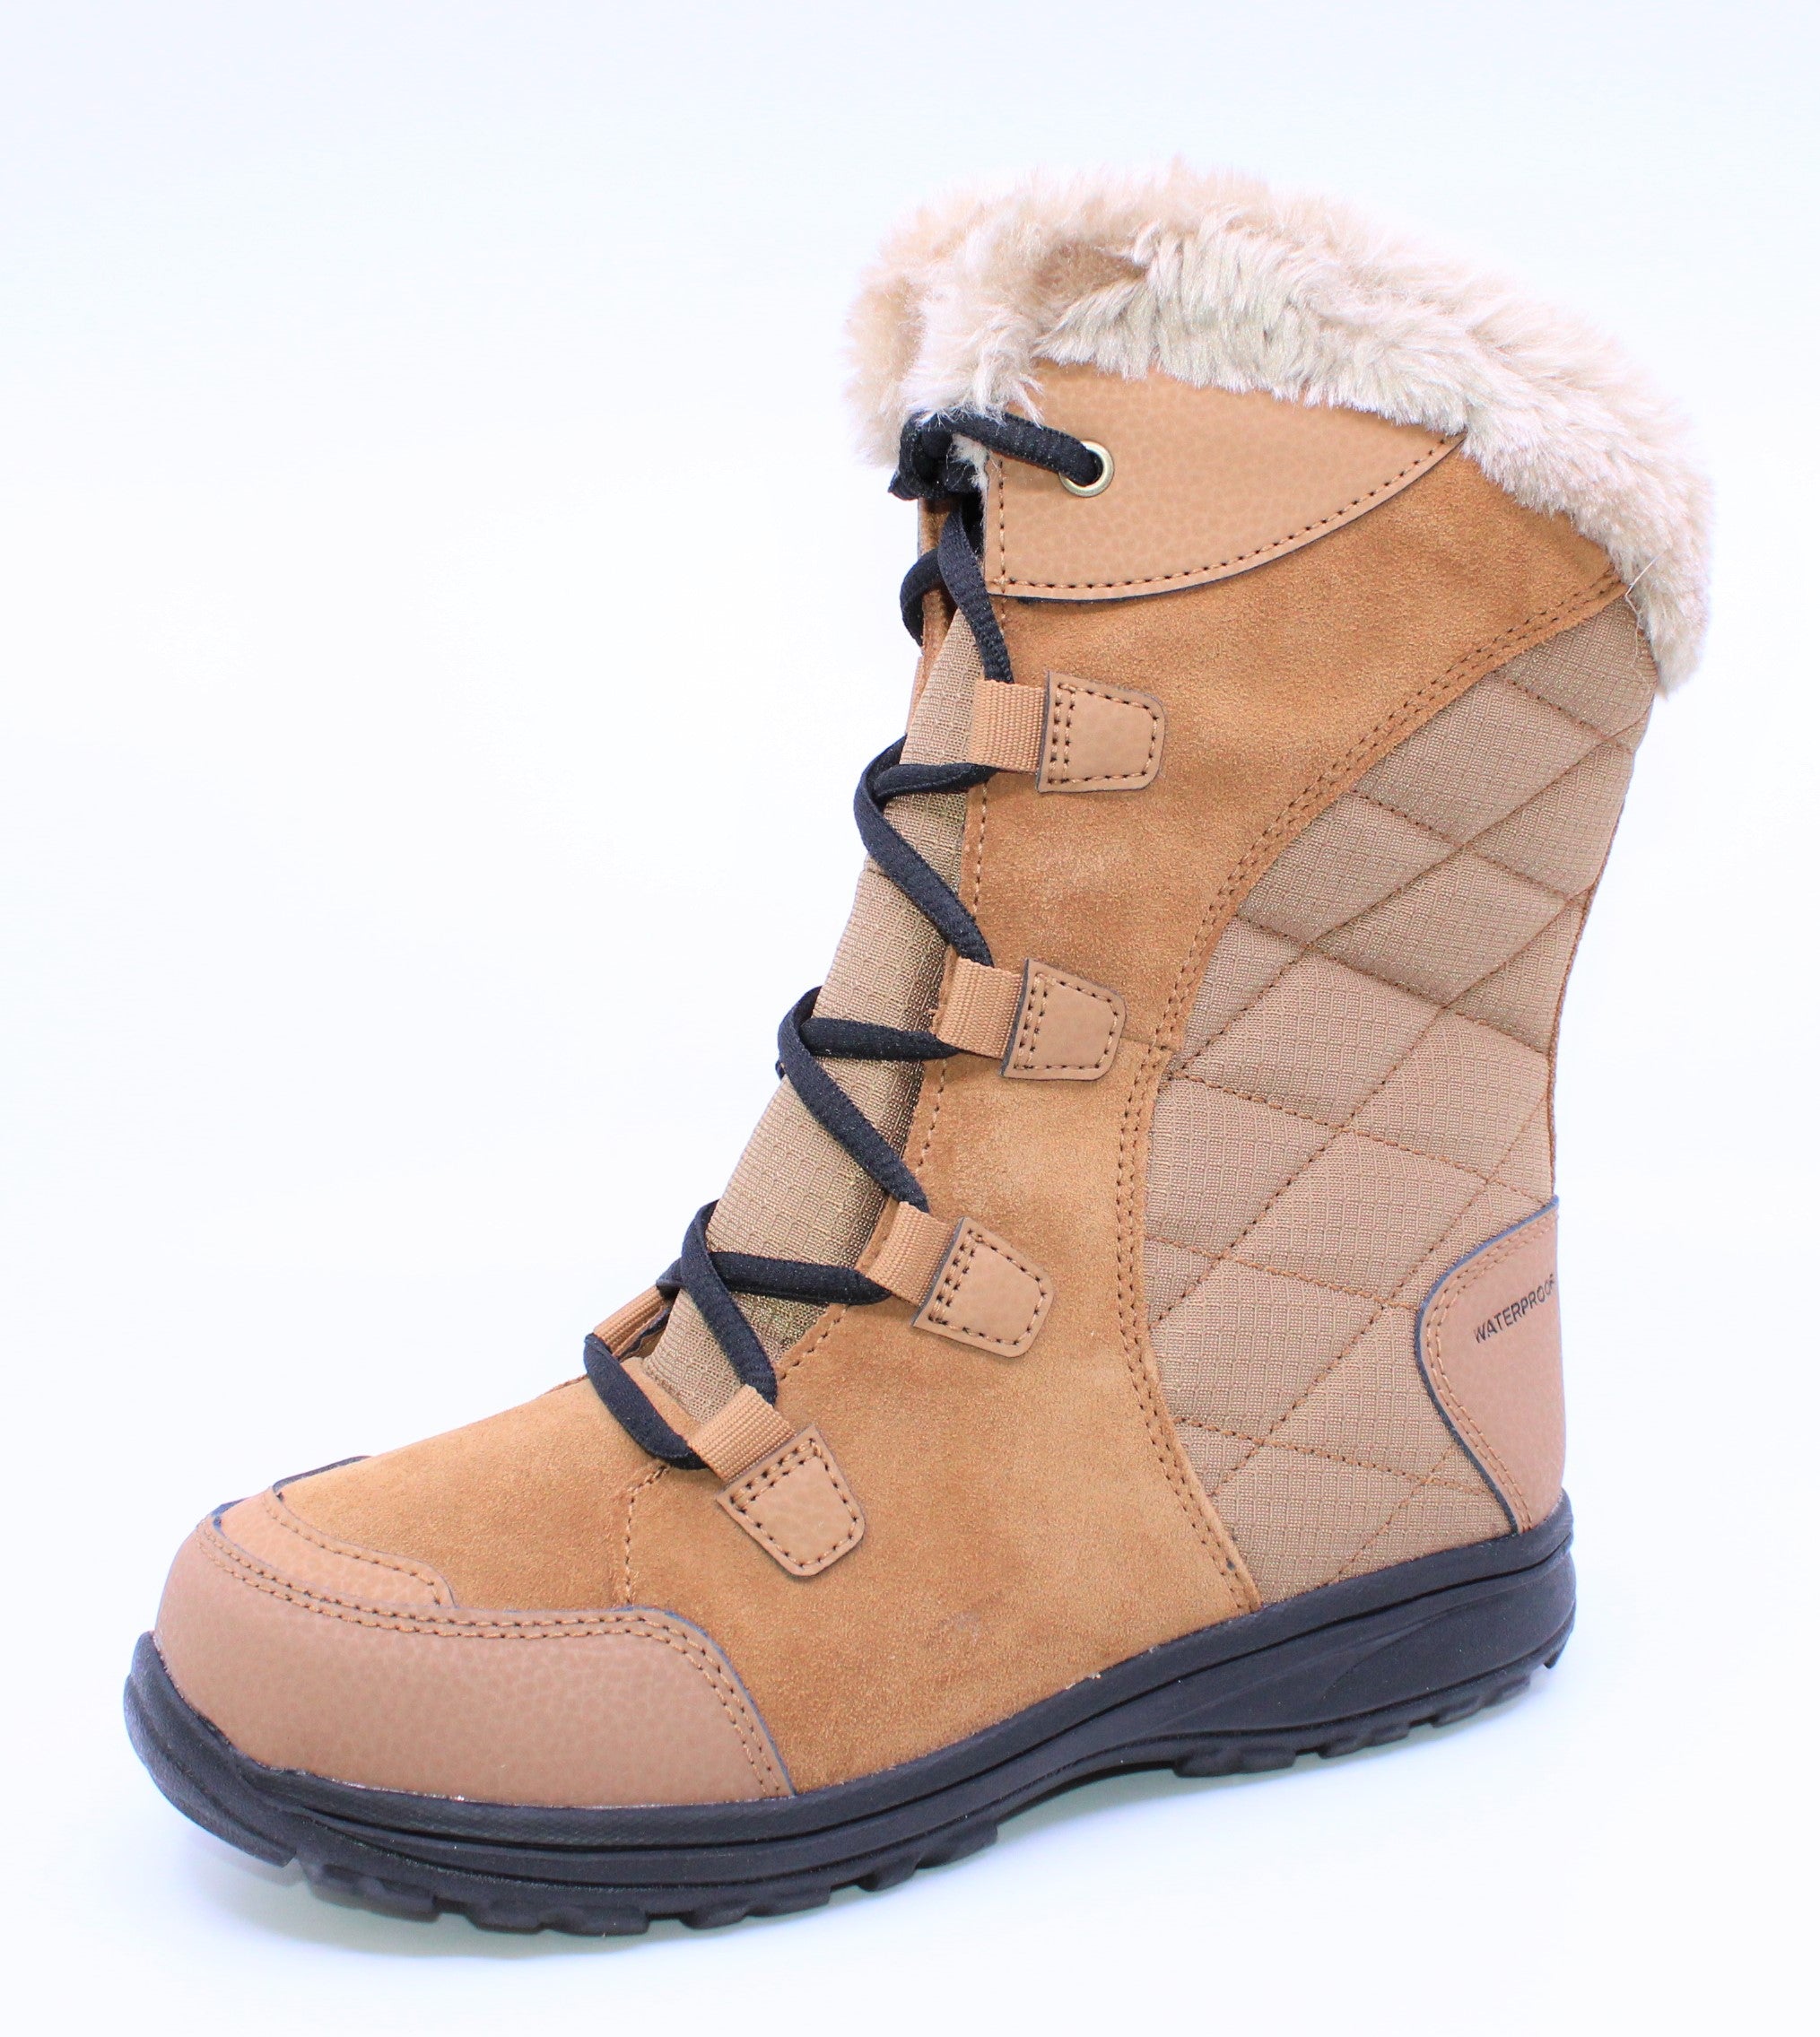 Bottes d'hiver Columbia Ice Maiden II Femme